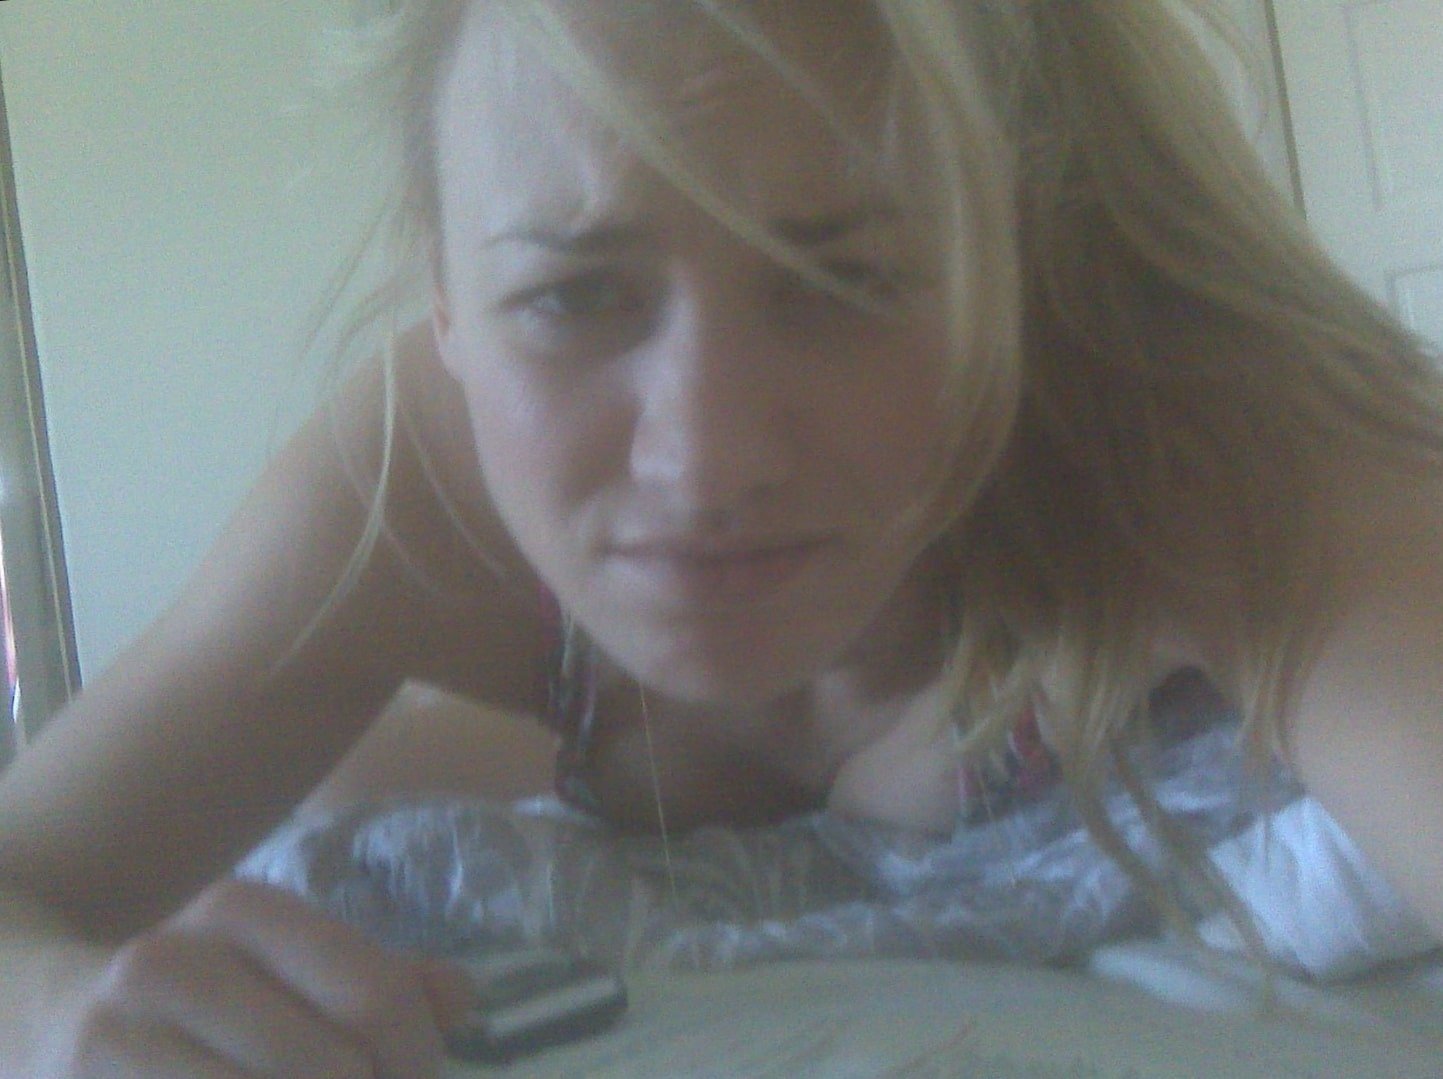 Yvonne Strahovski taking a selfit in bed cleavage showing